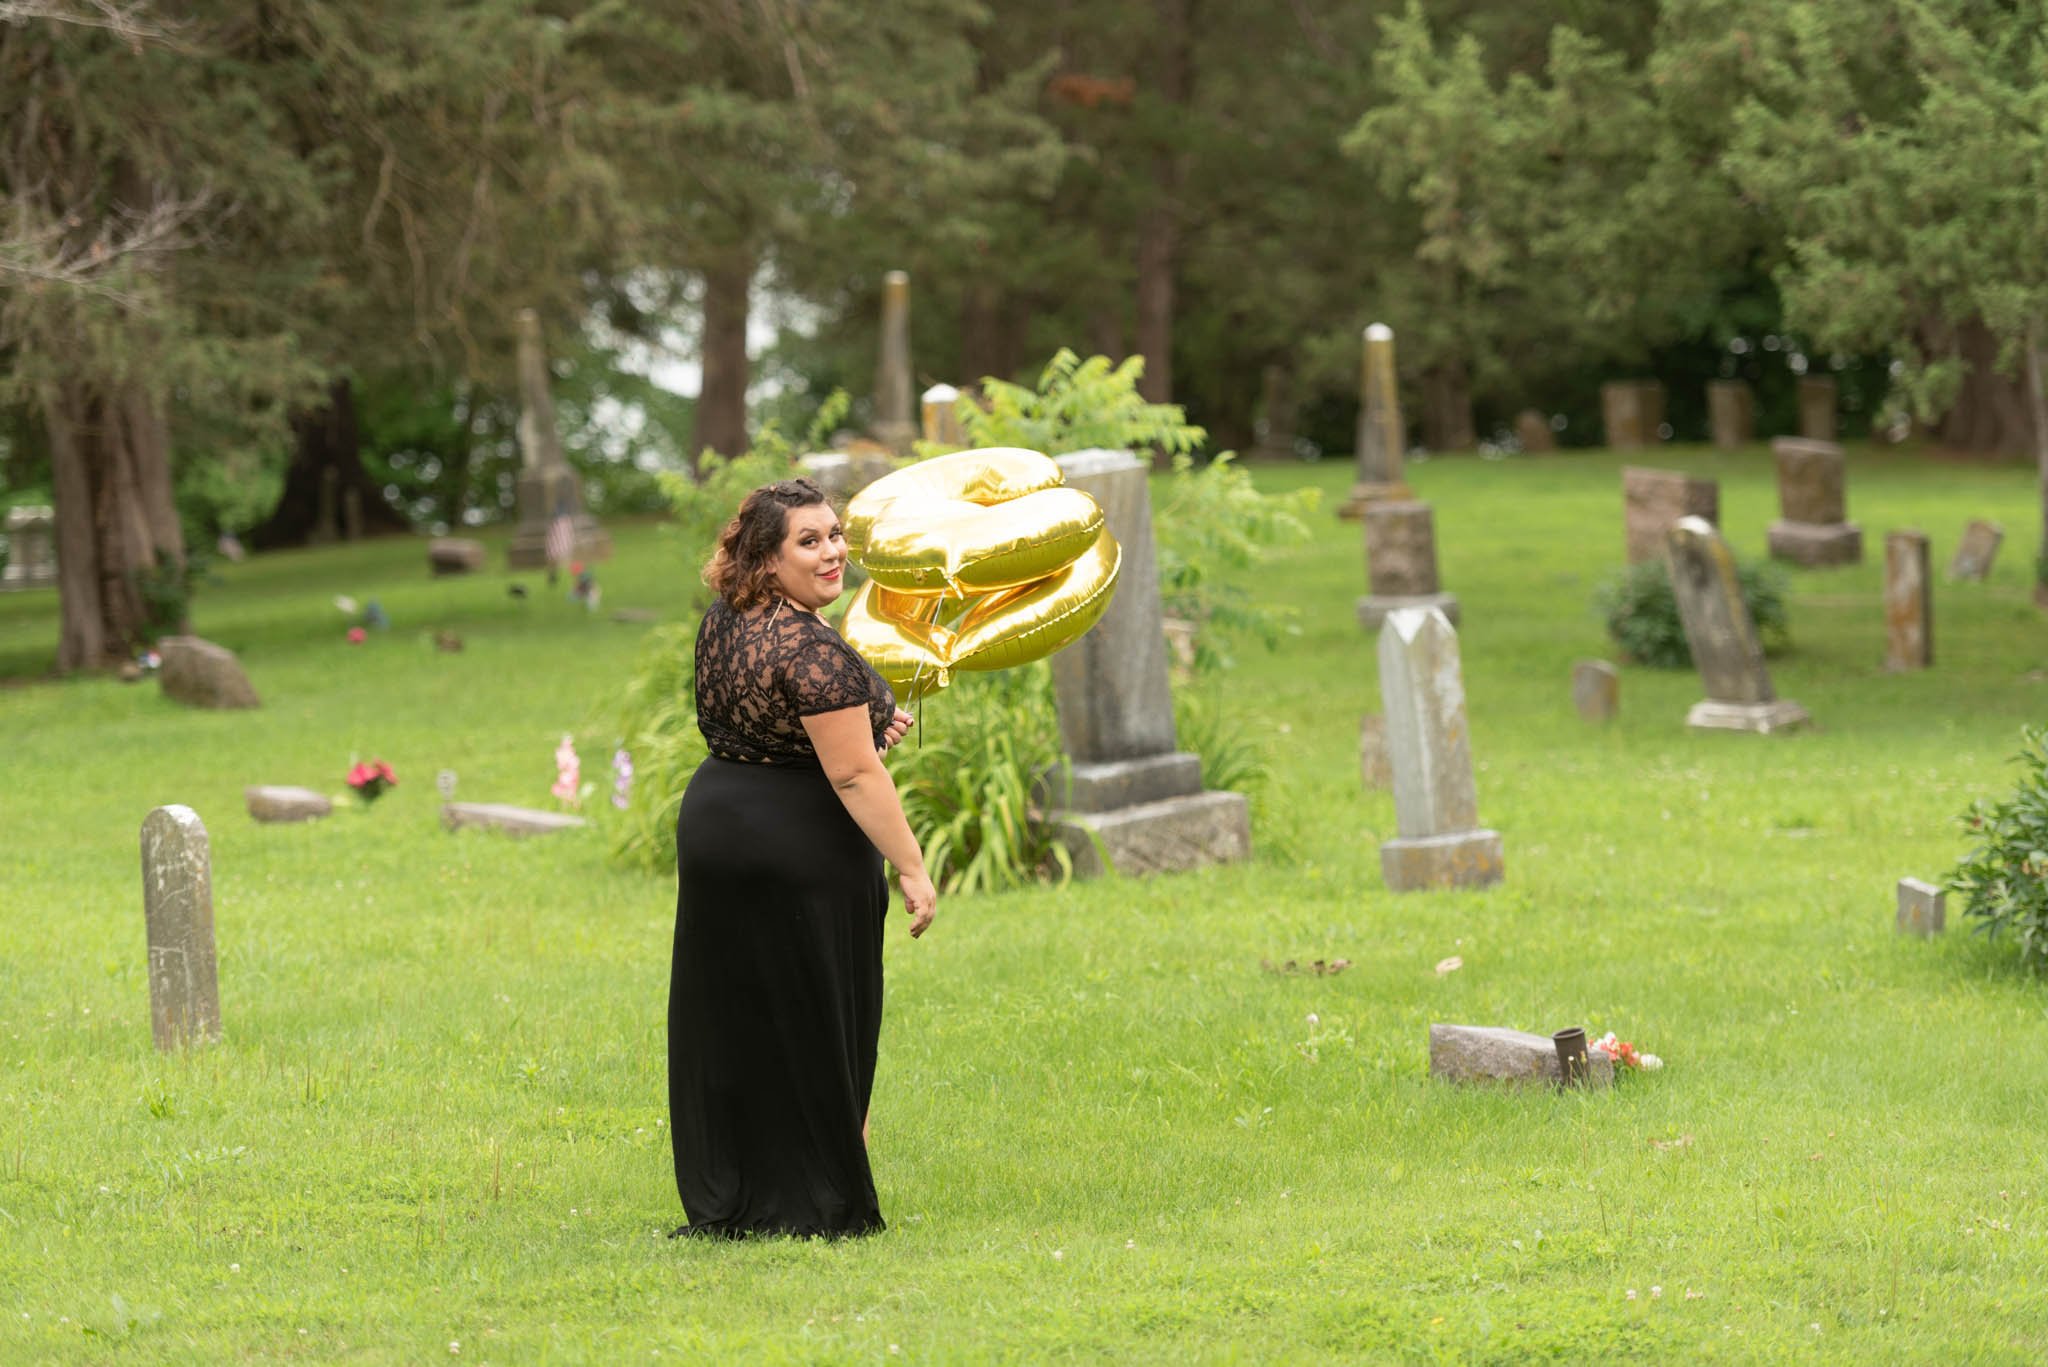  Samantha in black dress walks through cemetery carrying foil letter balloons and looks over her shoulder.  